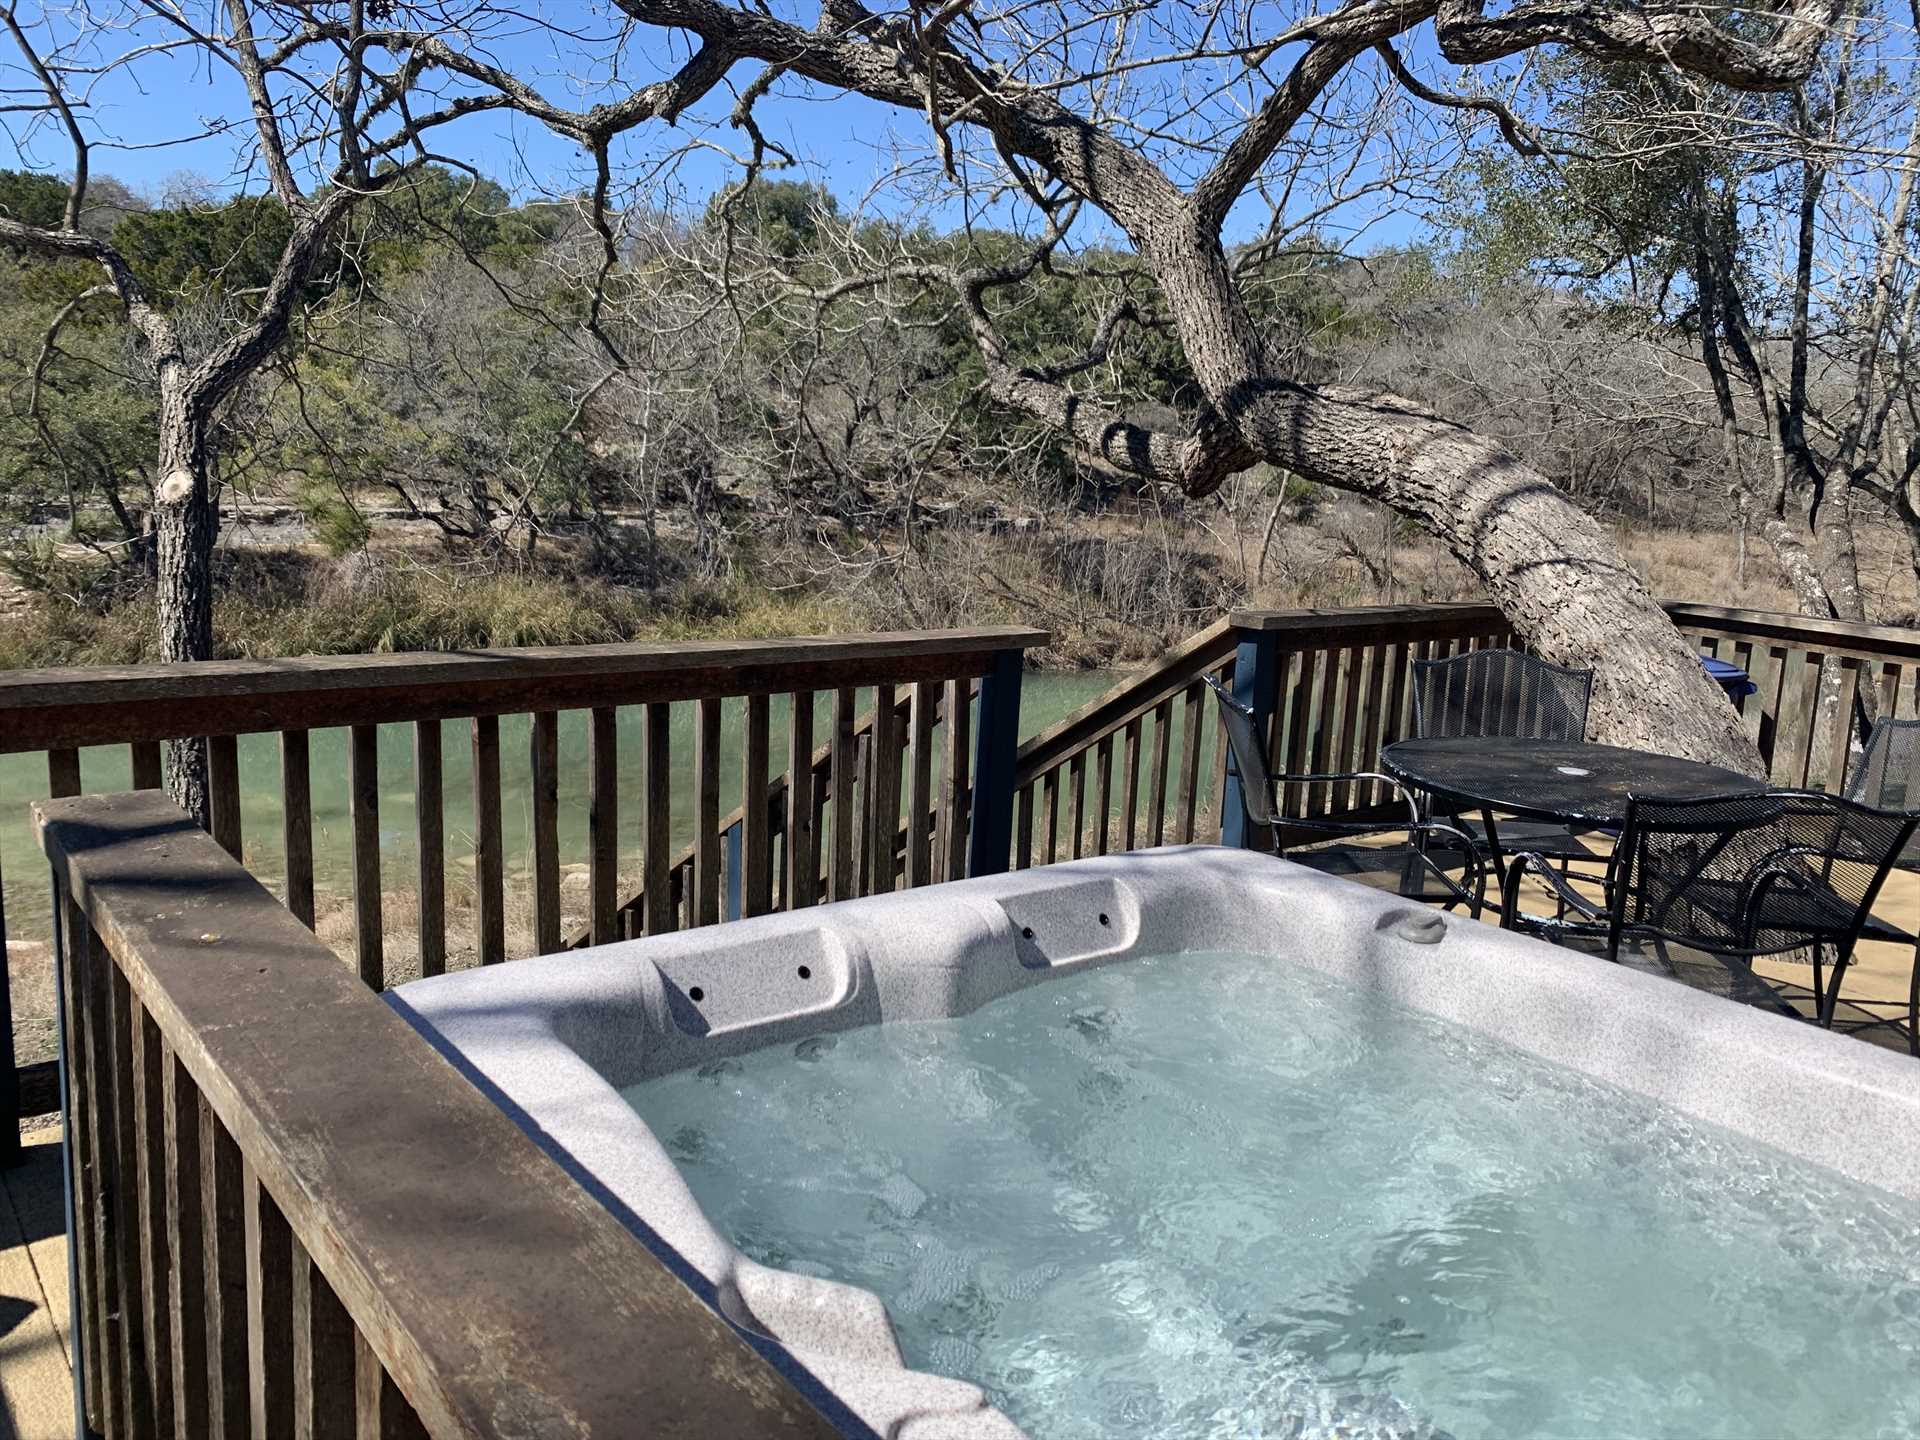                                                 A bubbling and soothing hot tub, and a knockout Hill Country view! This is an incredible spot to watch wildlife and stargaze, too.